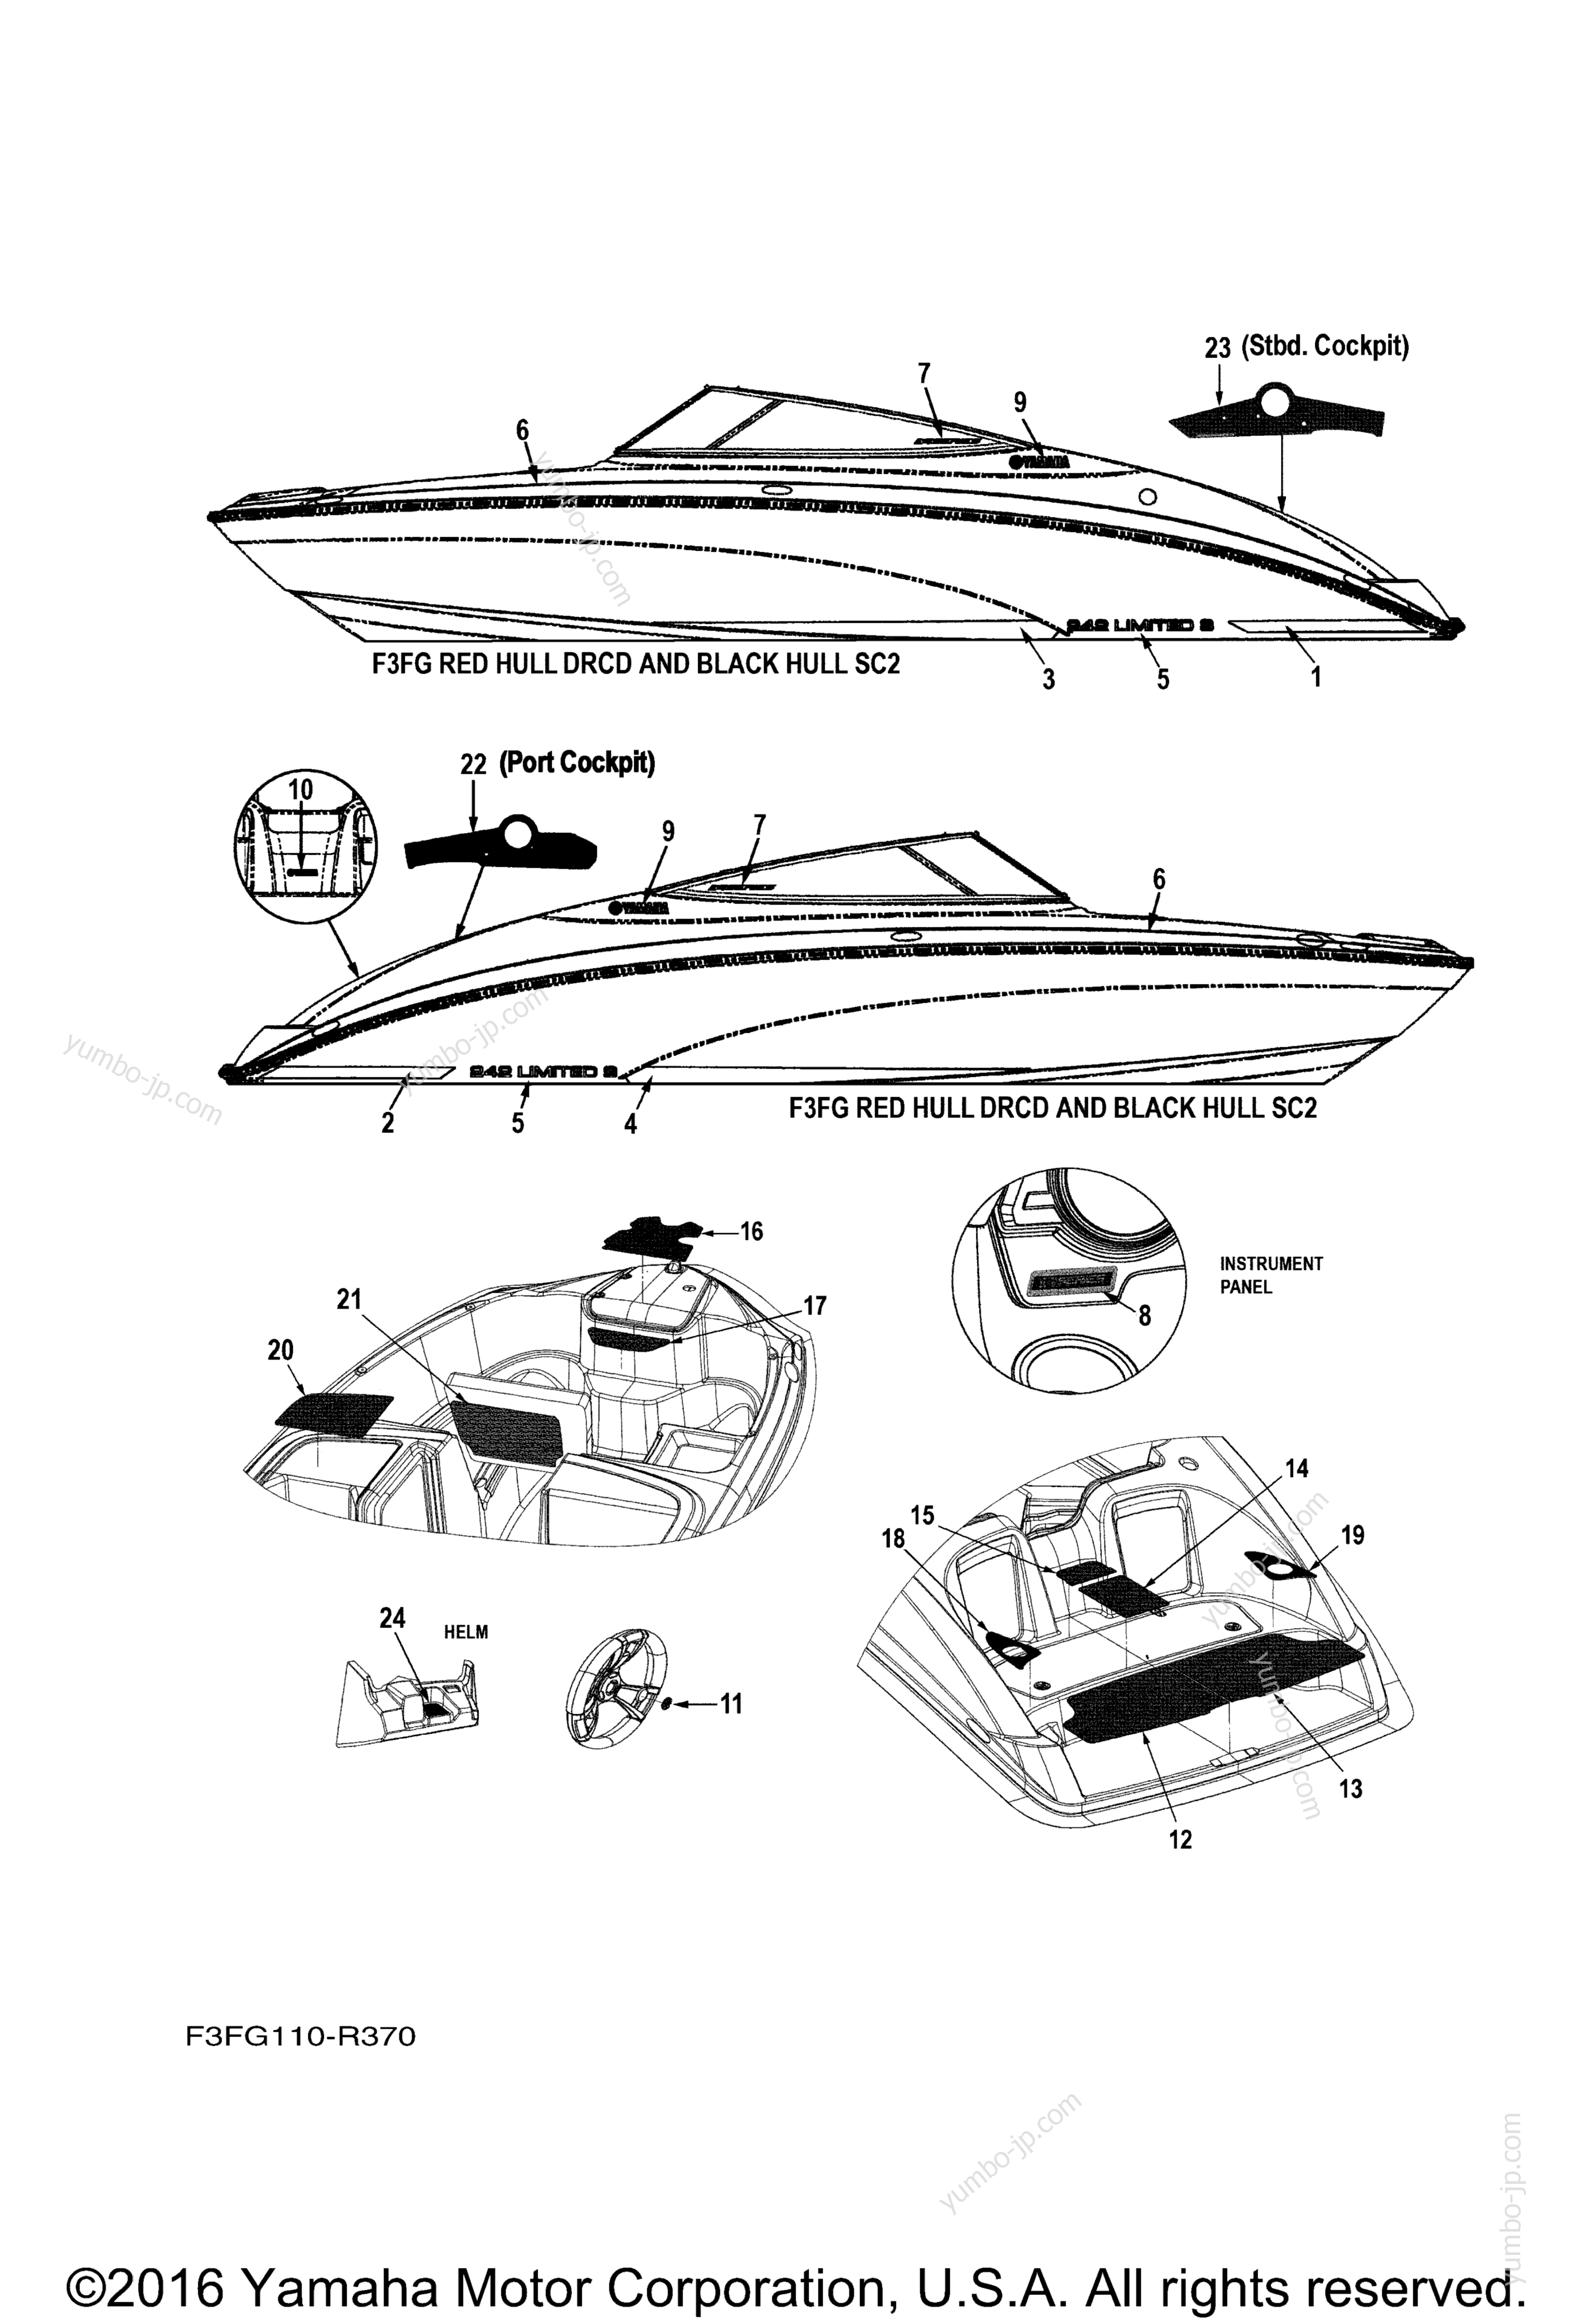 Graphics & Mats for boats YAMAHA 242 LIMITED S E SERIES CALIFORNIA (SAT1800FRB) CA 2016 year